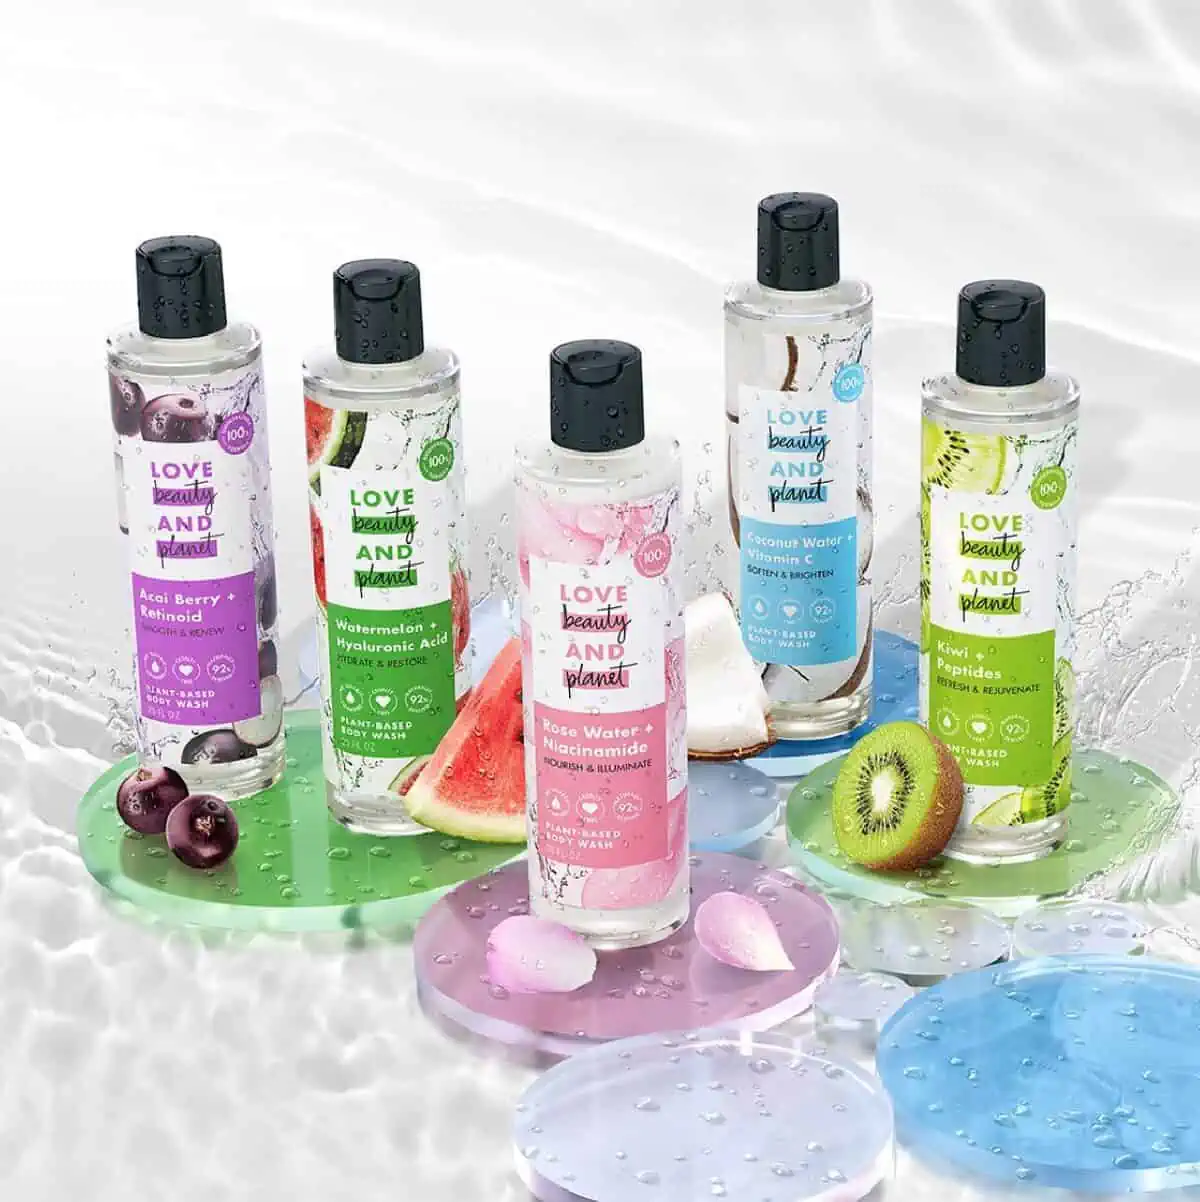 Five clear and colorful bottles of Love Beauty and Planet plant-based body washes on translucent colorful circles and a watery background. 